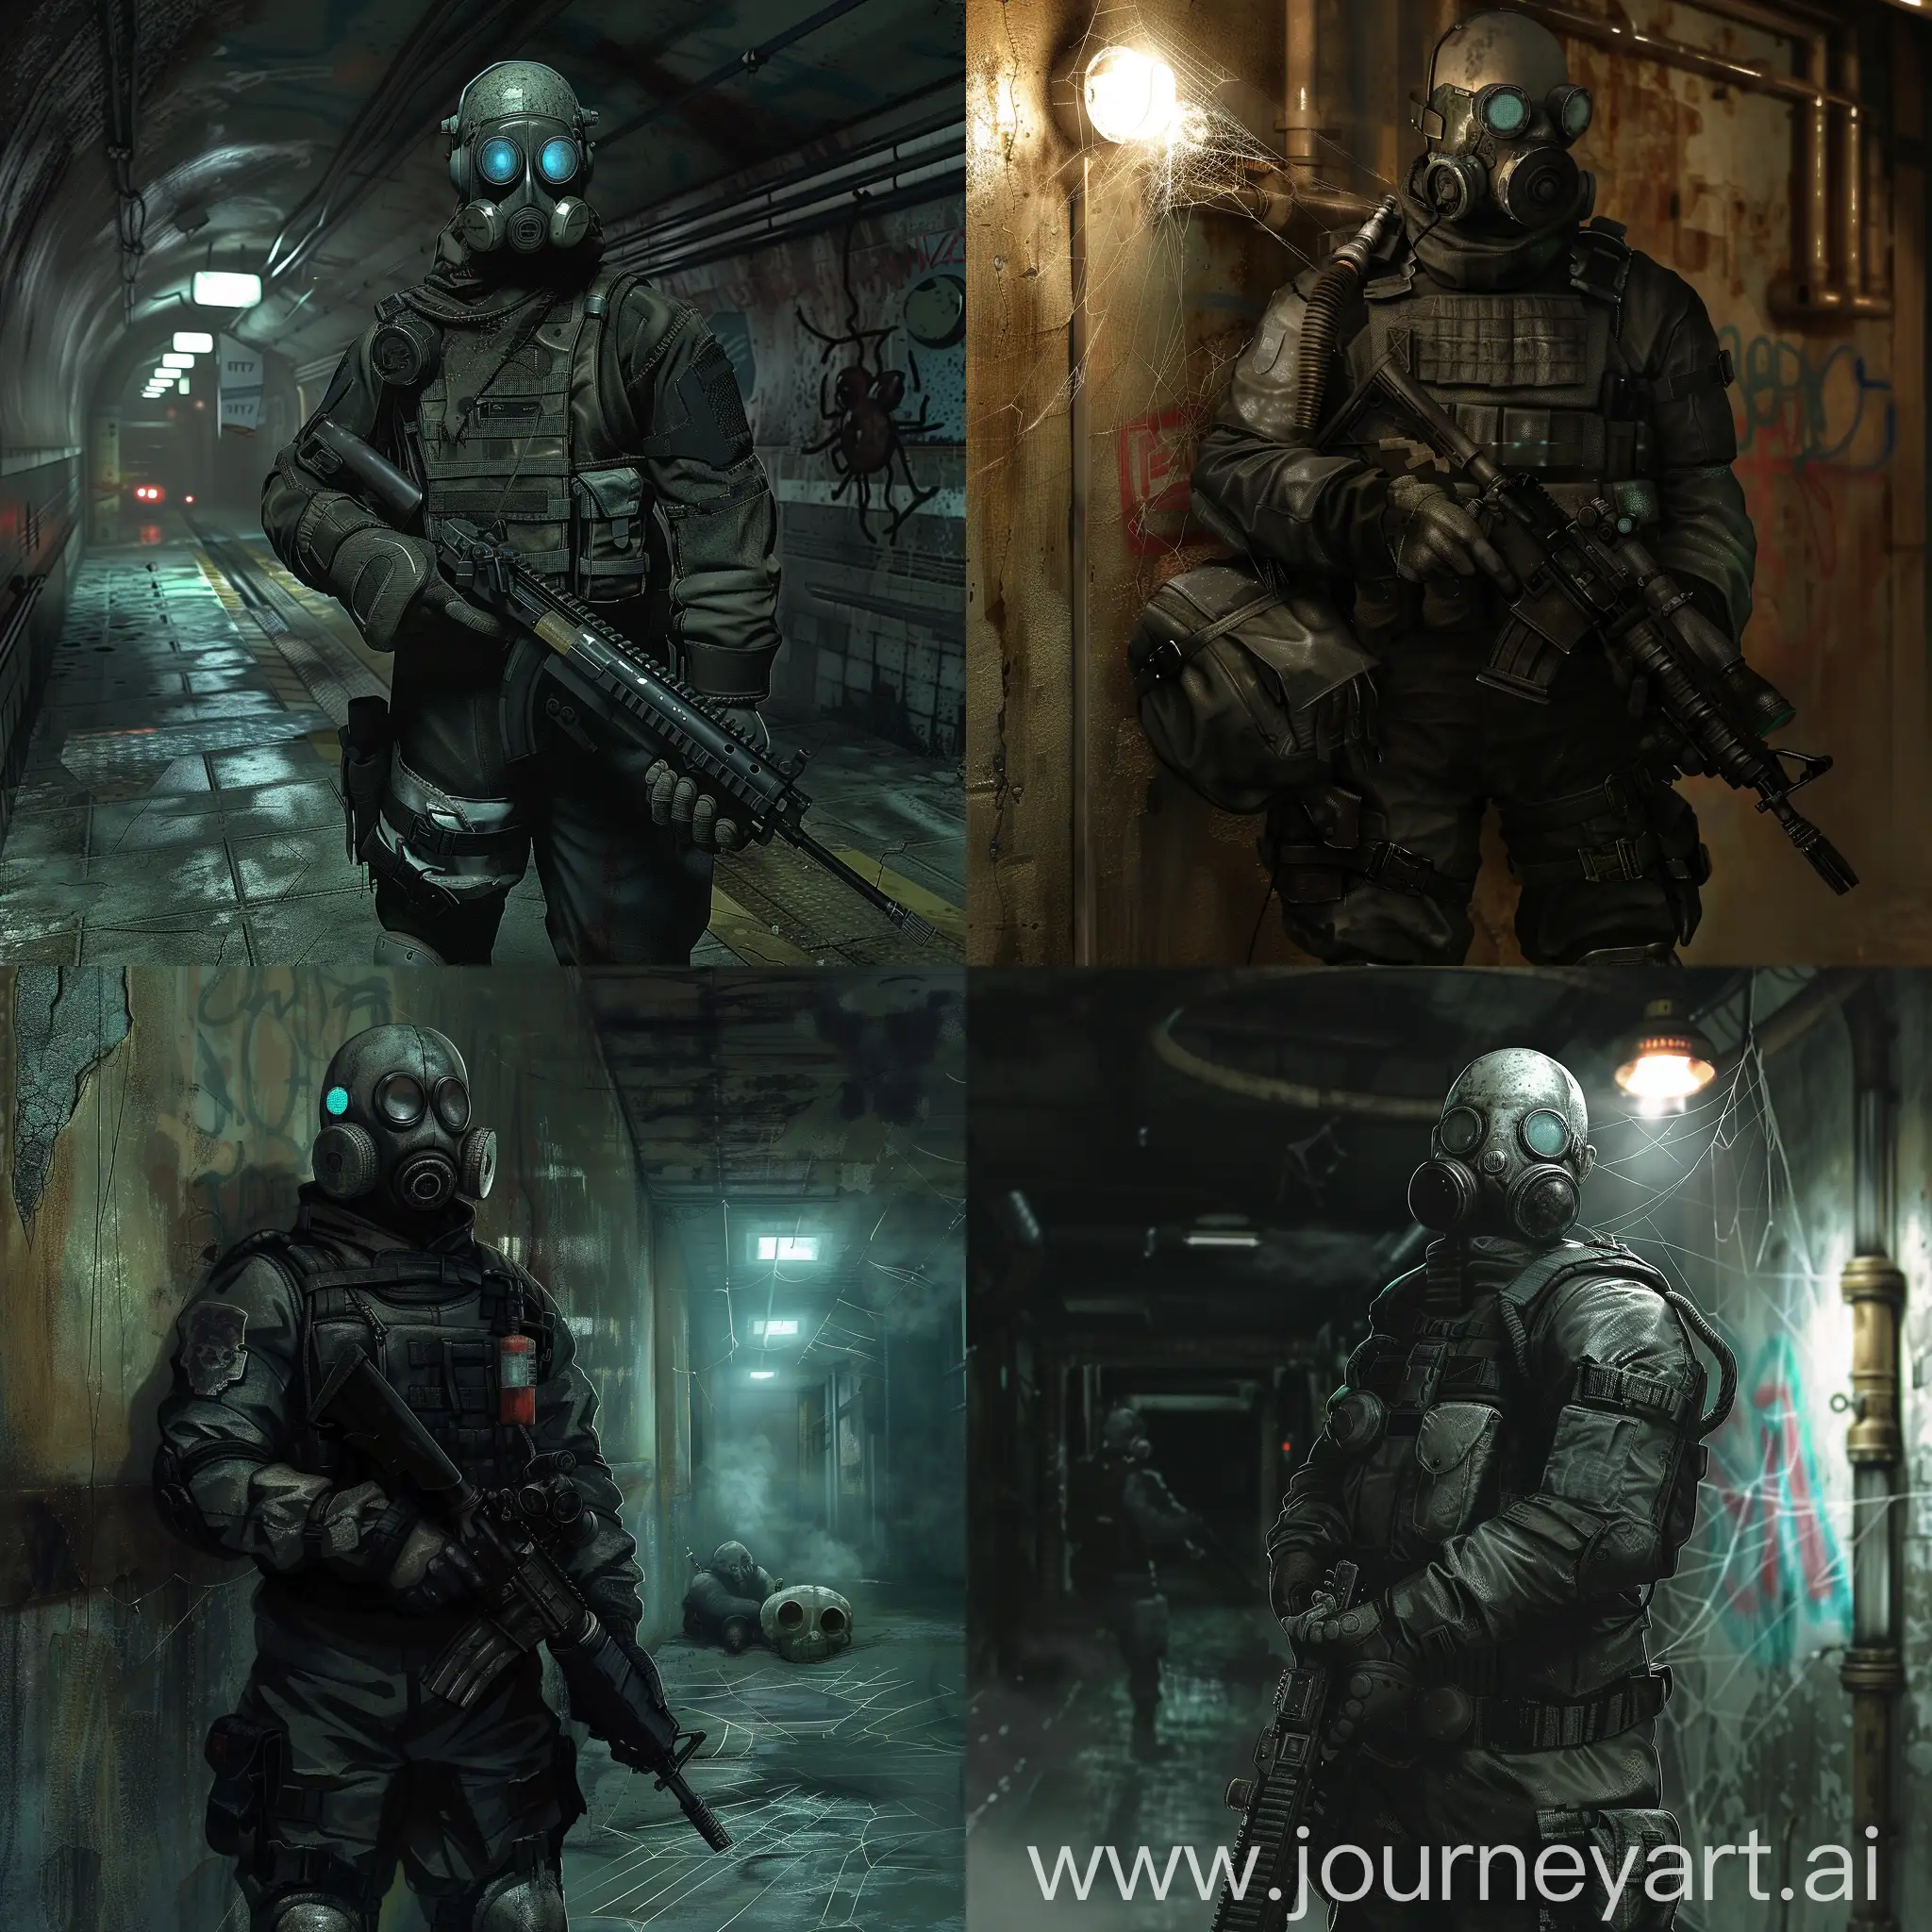 Stalker-in-Homemade-Chemical-Protection-Tense-Standoff-in-Abandoned-Metro-Station